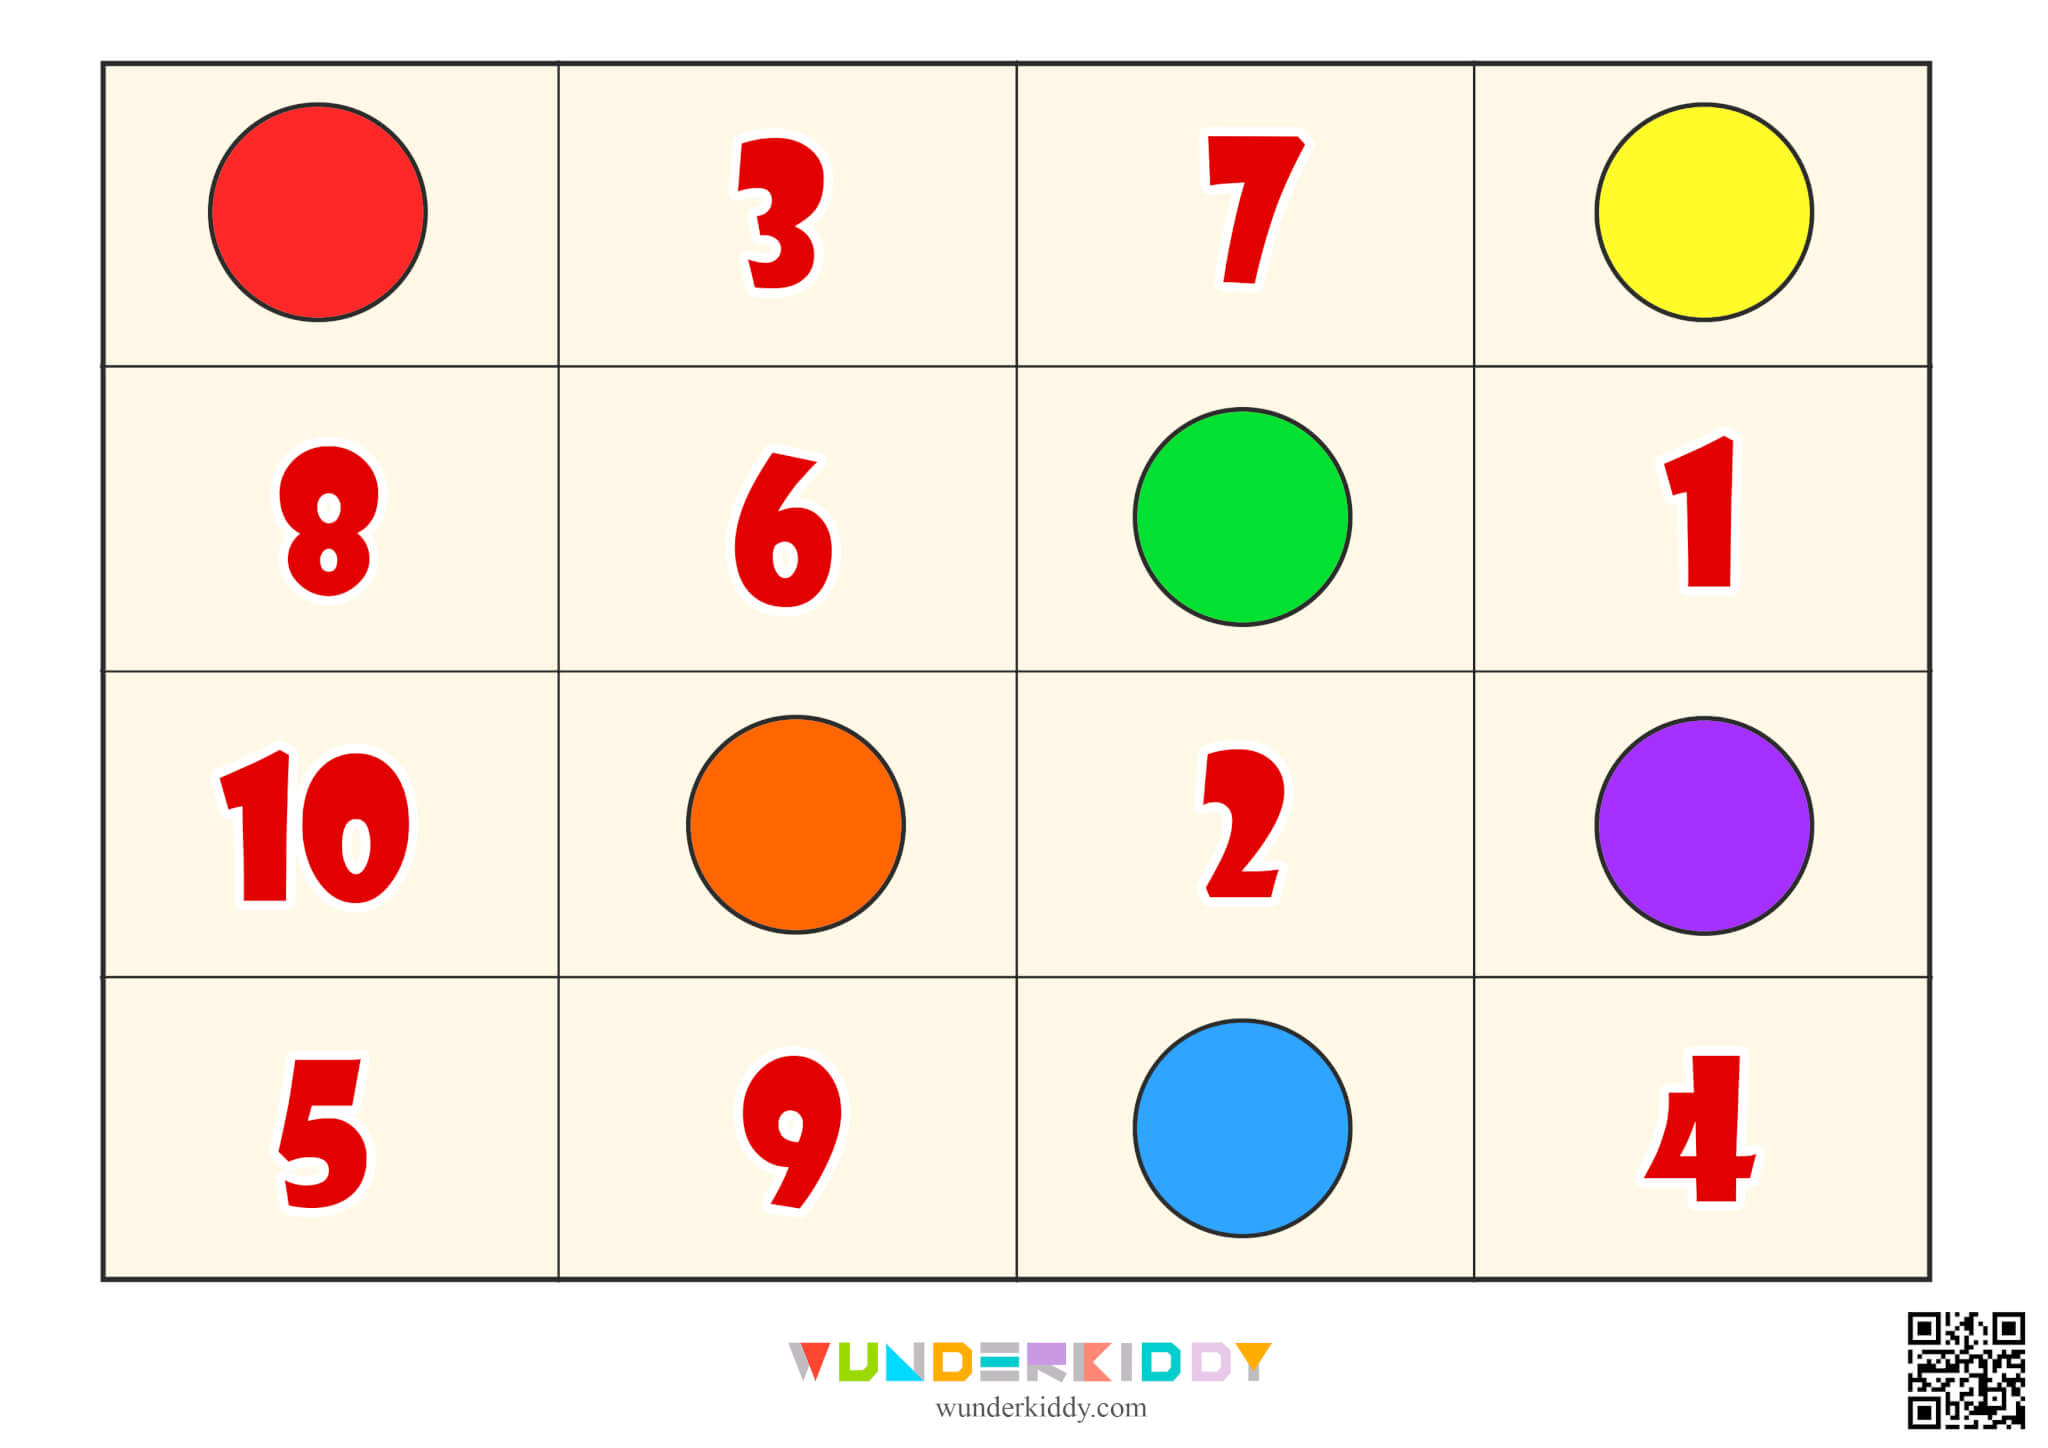 Fun Math Puzzle for Kids - Image 2